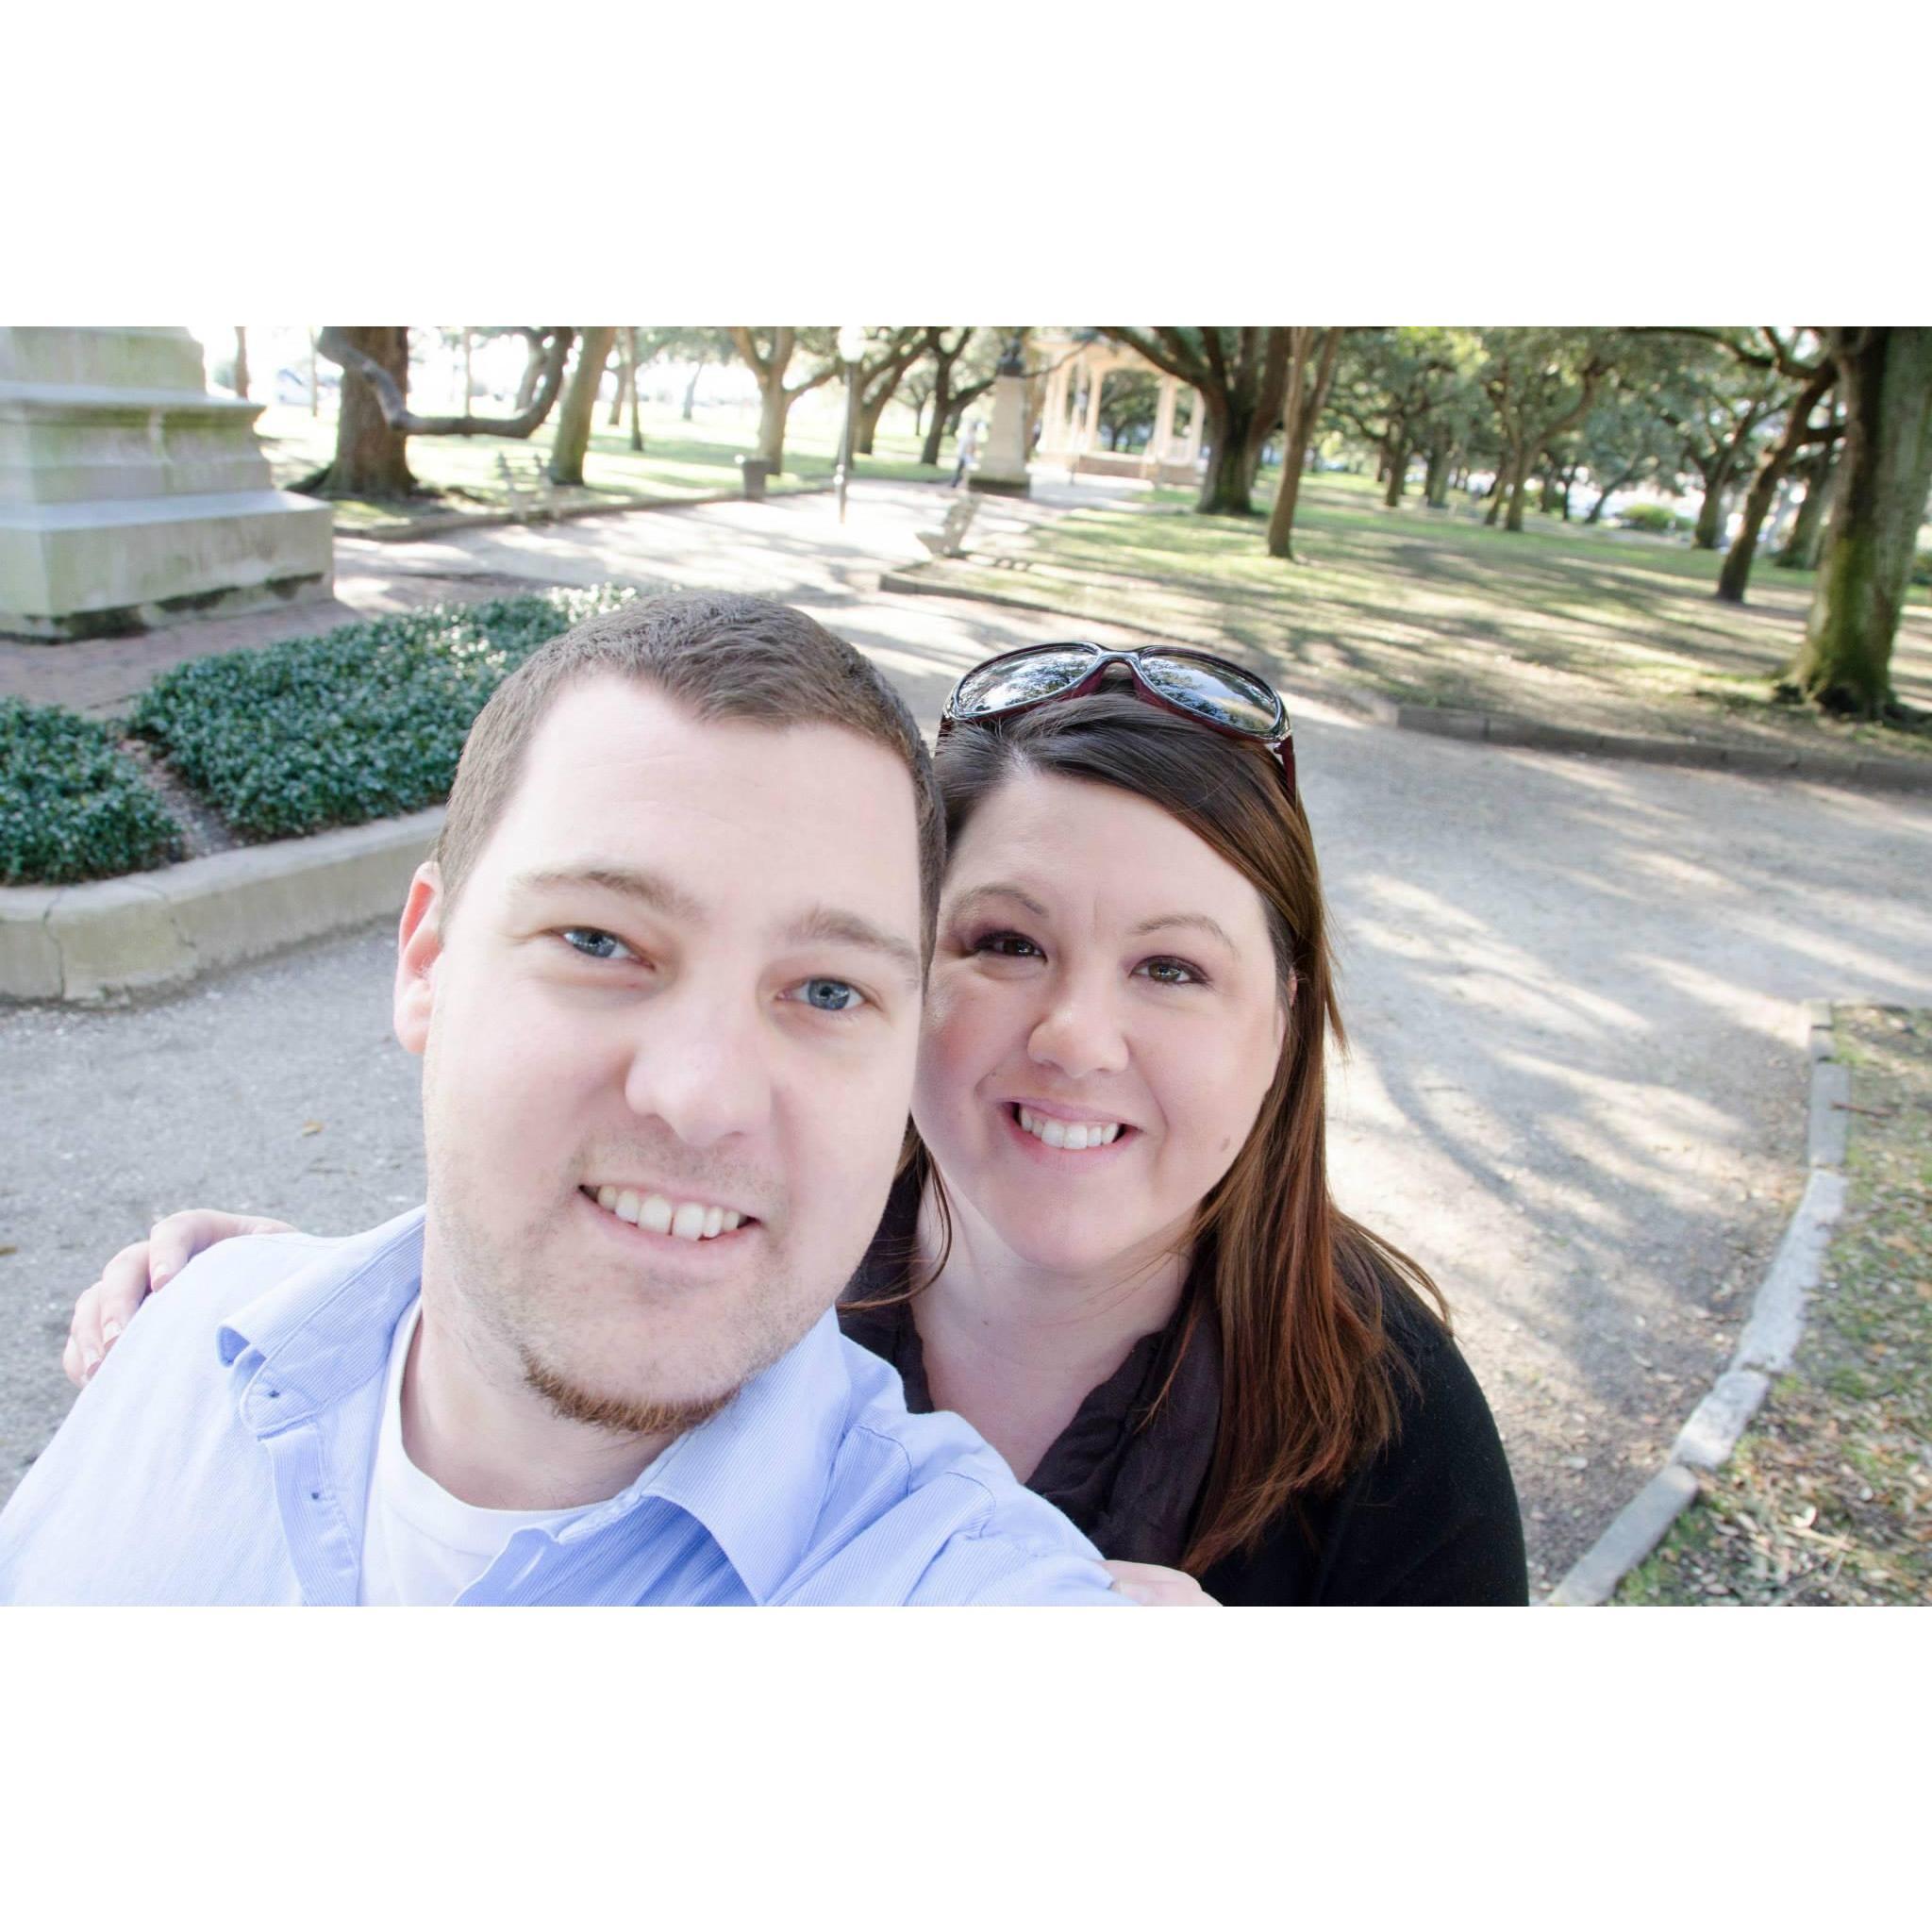 Our trip to Charleston! We celebrated our first anniversary there and my Birthday!